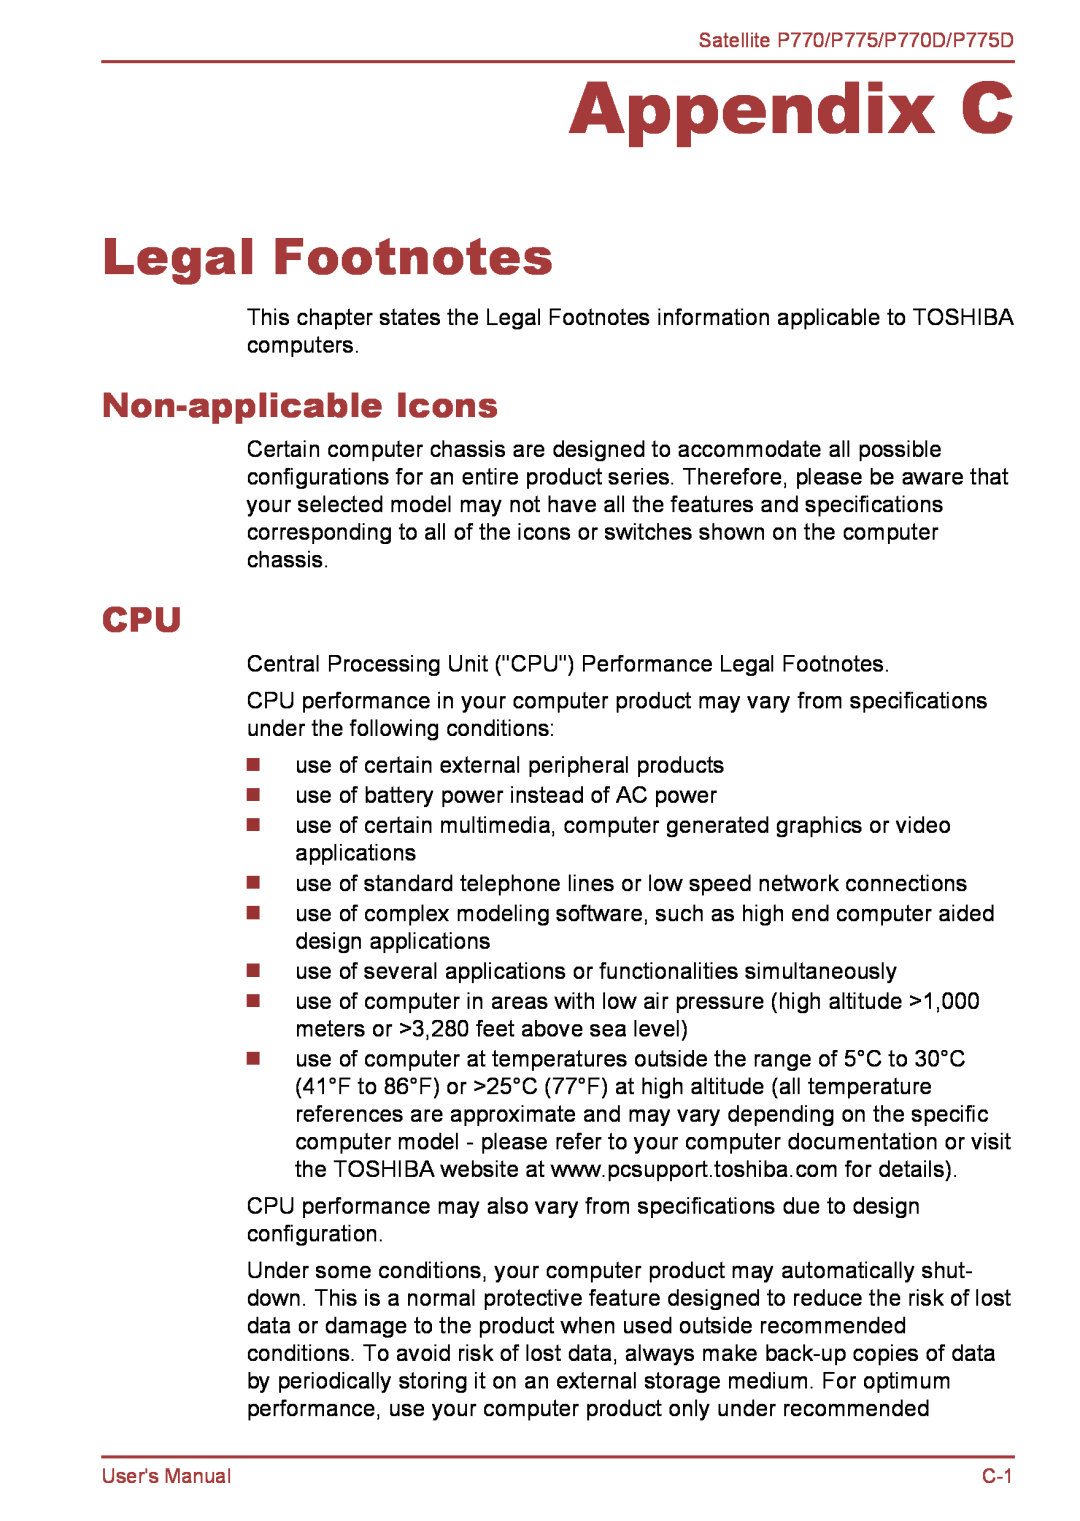 Toshiba P770 user manual Appendix C, Legal Footnotes, Non-applicable Icons 